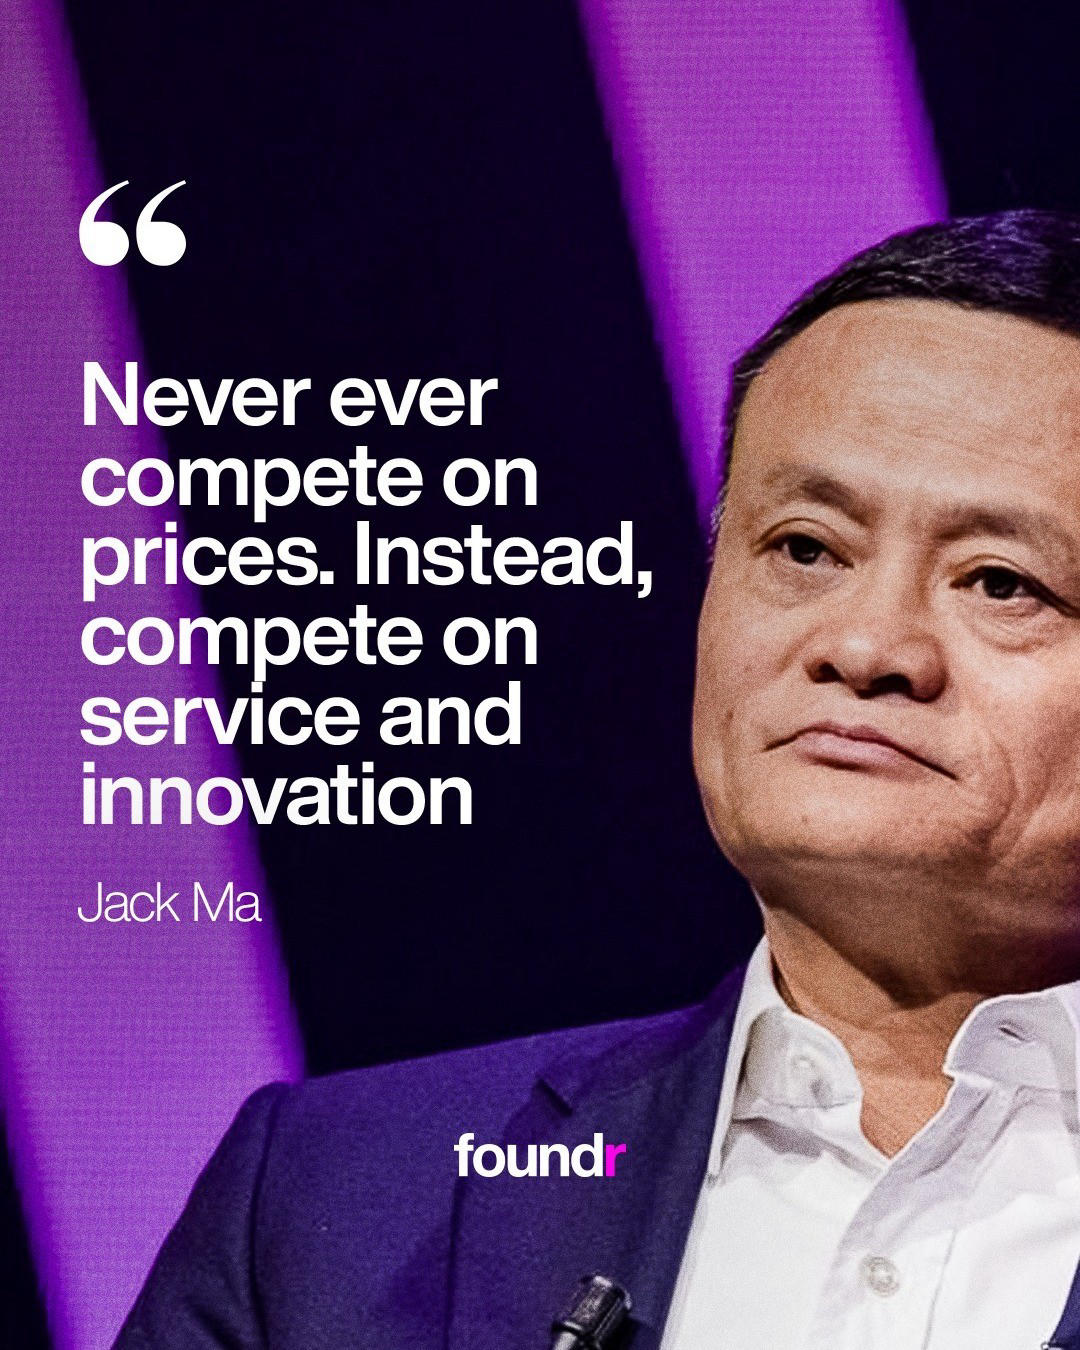 image  1 Foundr - Jack Ma Yun is a Chinese business magnate, investor, and philanthropist